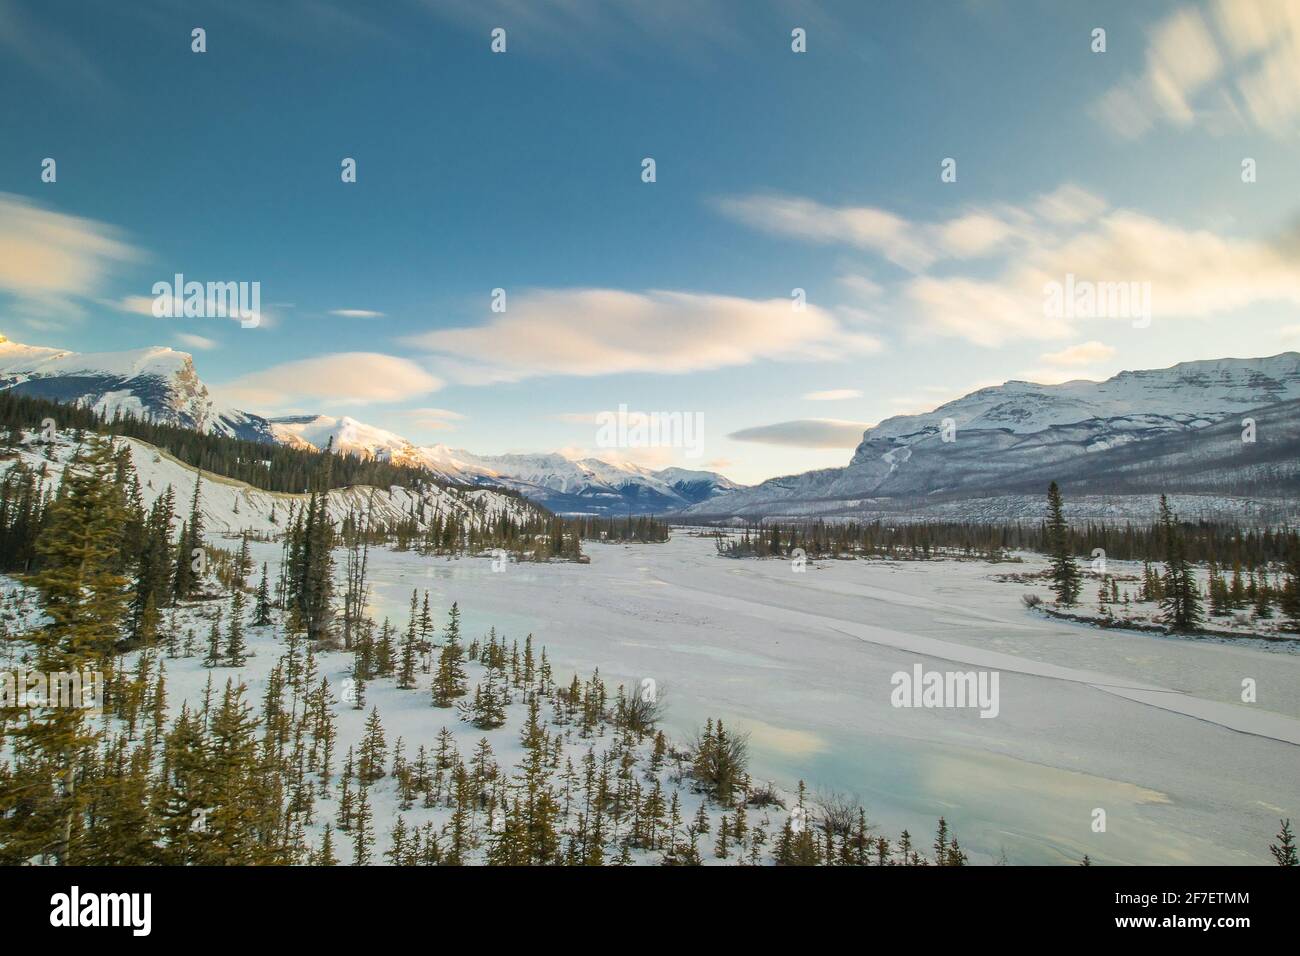 View from the bridge at Saskatchewan river crossing in early morning winter hours. Sun just rising behind the hills, frozen river seen in the foregrou Stock Photo